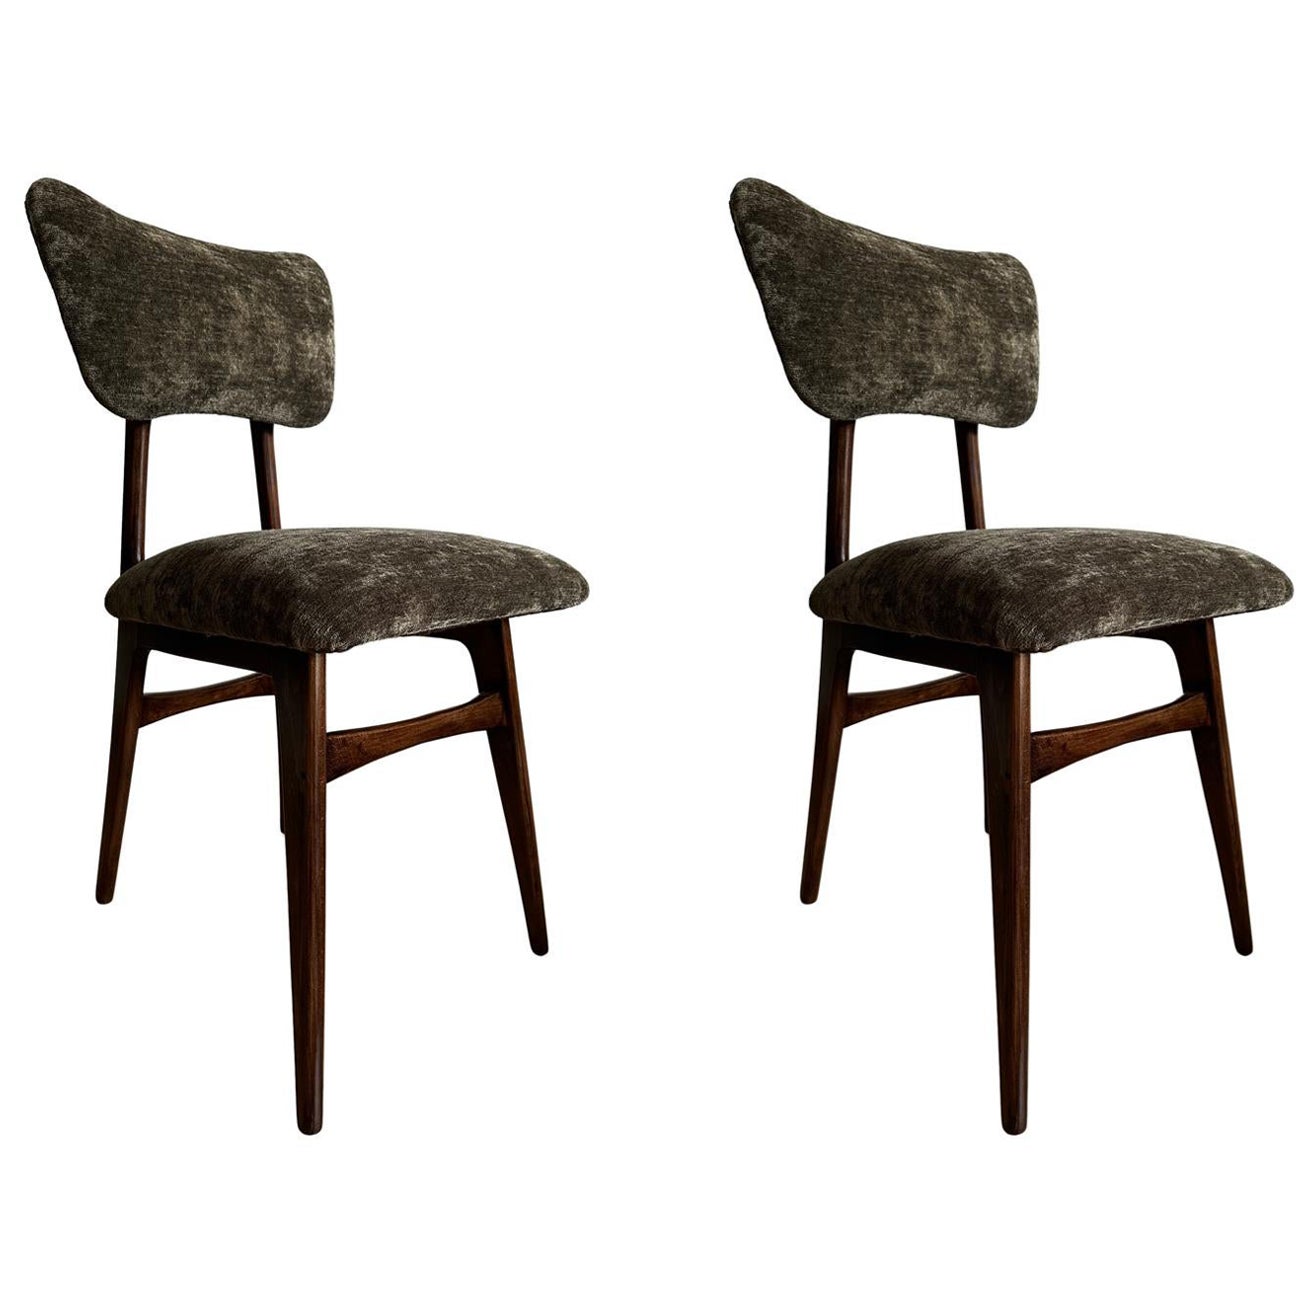 Set of Two Midcentury Dining Chairs in Green Velvet Upholstery, Poland, 1960s